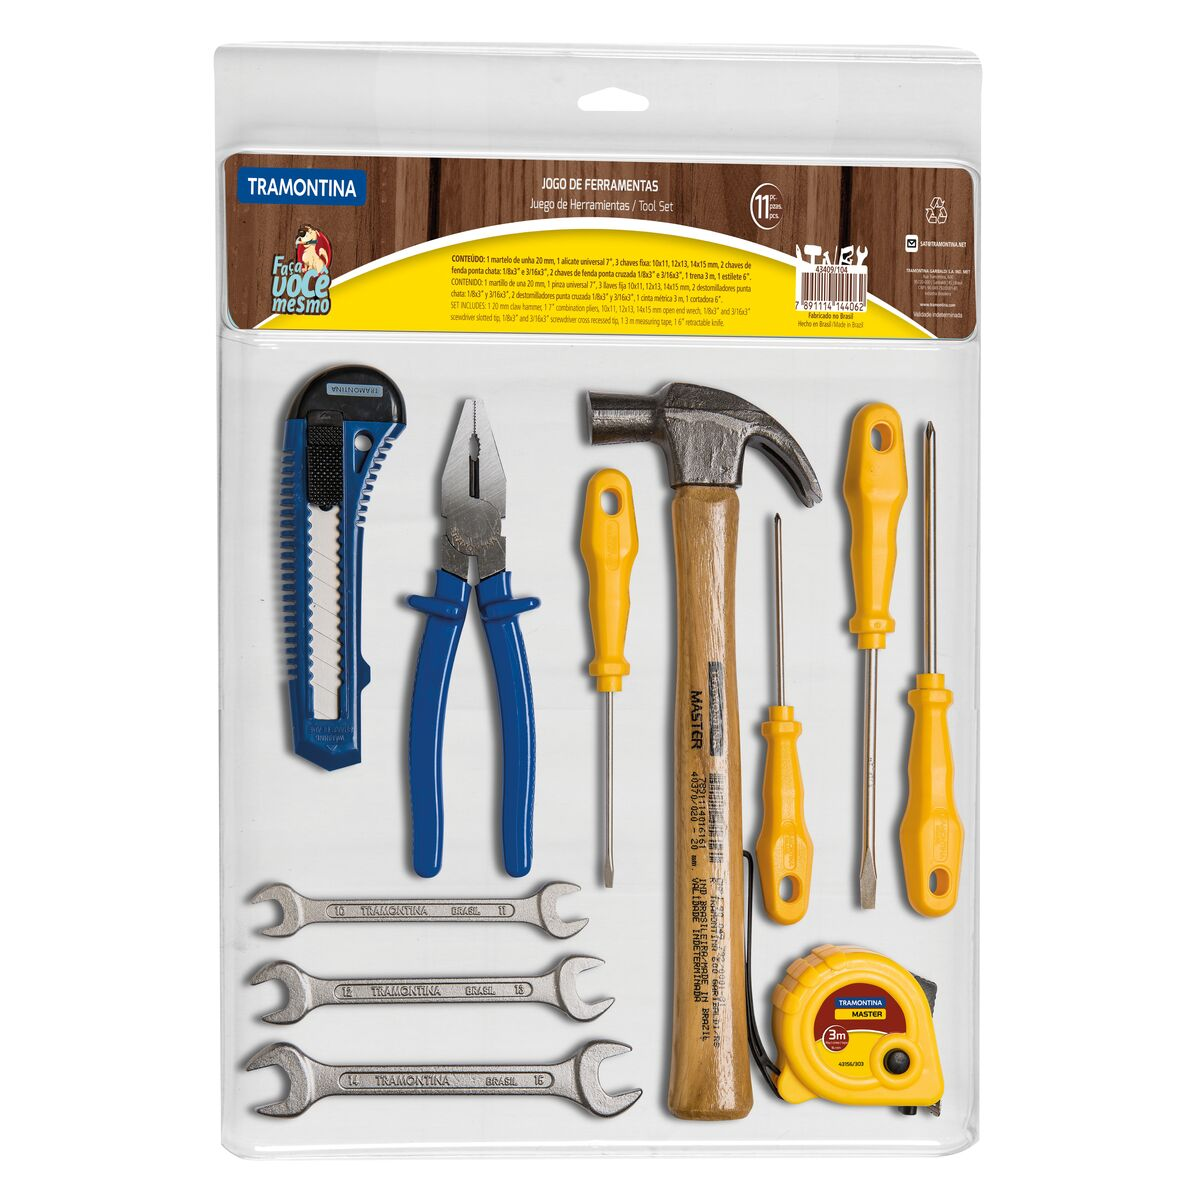 Tramontina tool kit with hammer, measuring tape, pliers, retractable knife, screwdrivers and open end wrenches, 11 pieces